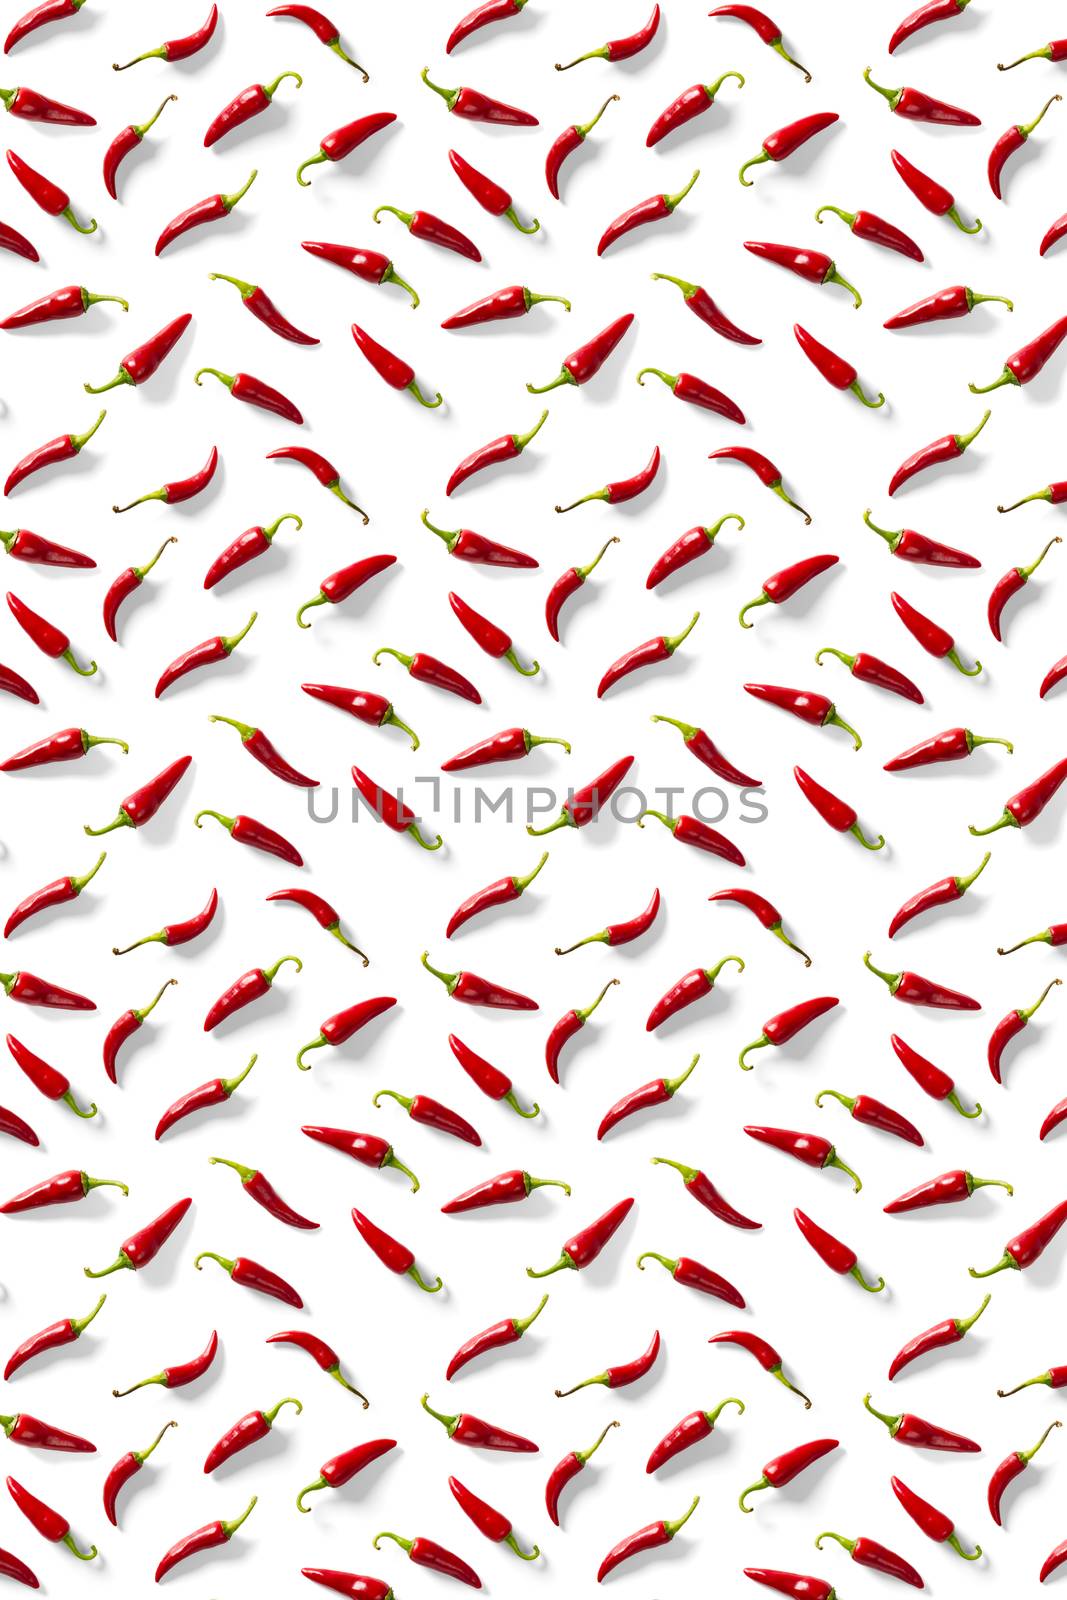 Creative background made of red chili or chilli on white backdrop. Minimal food backgroud. Red hot chilli peppers background. by PhotoTime